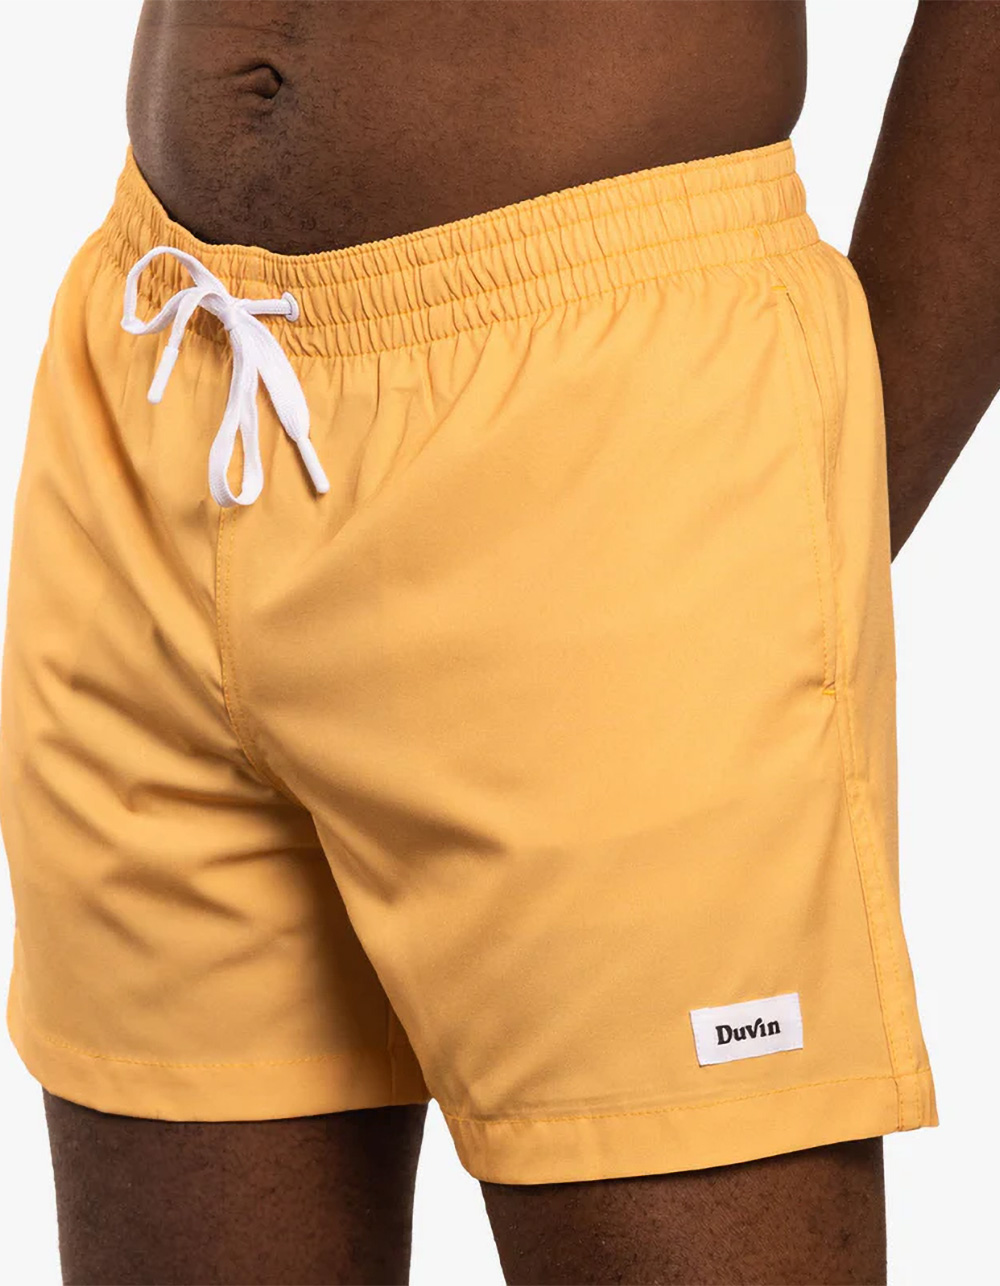 DUVIN Palm Mens Volley Shorts - YELLOW | Tillys